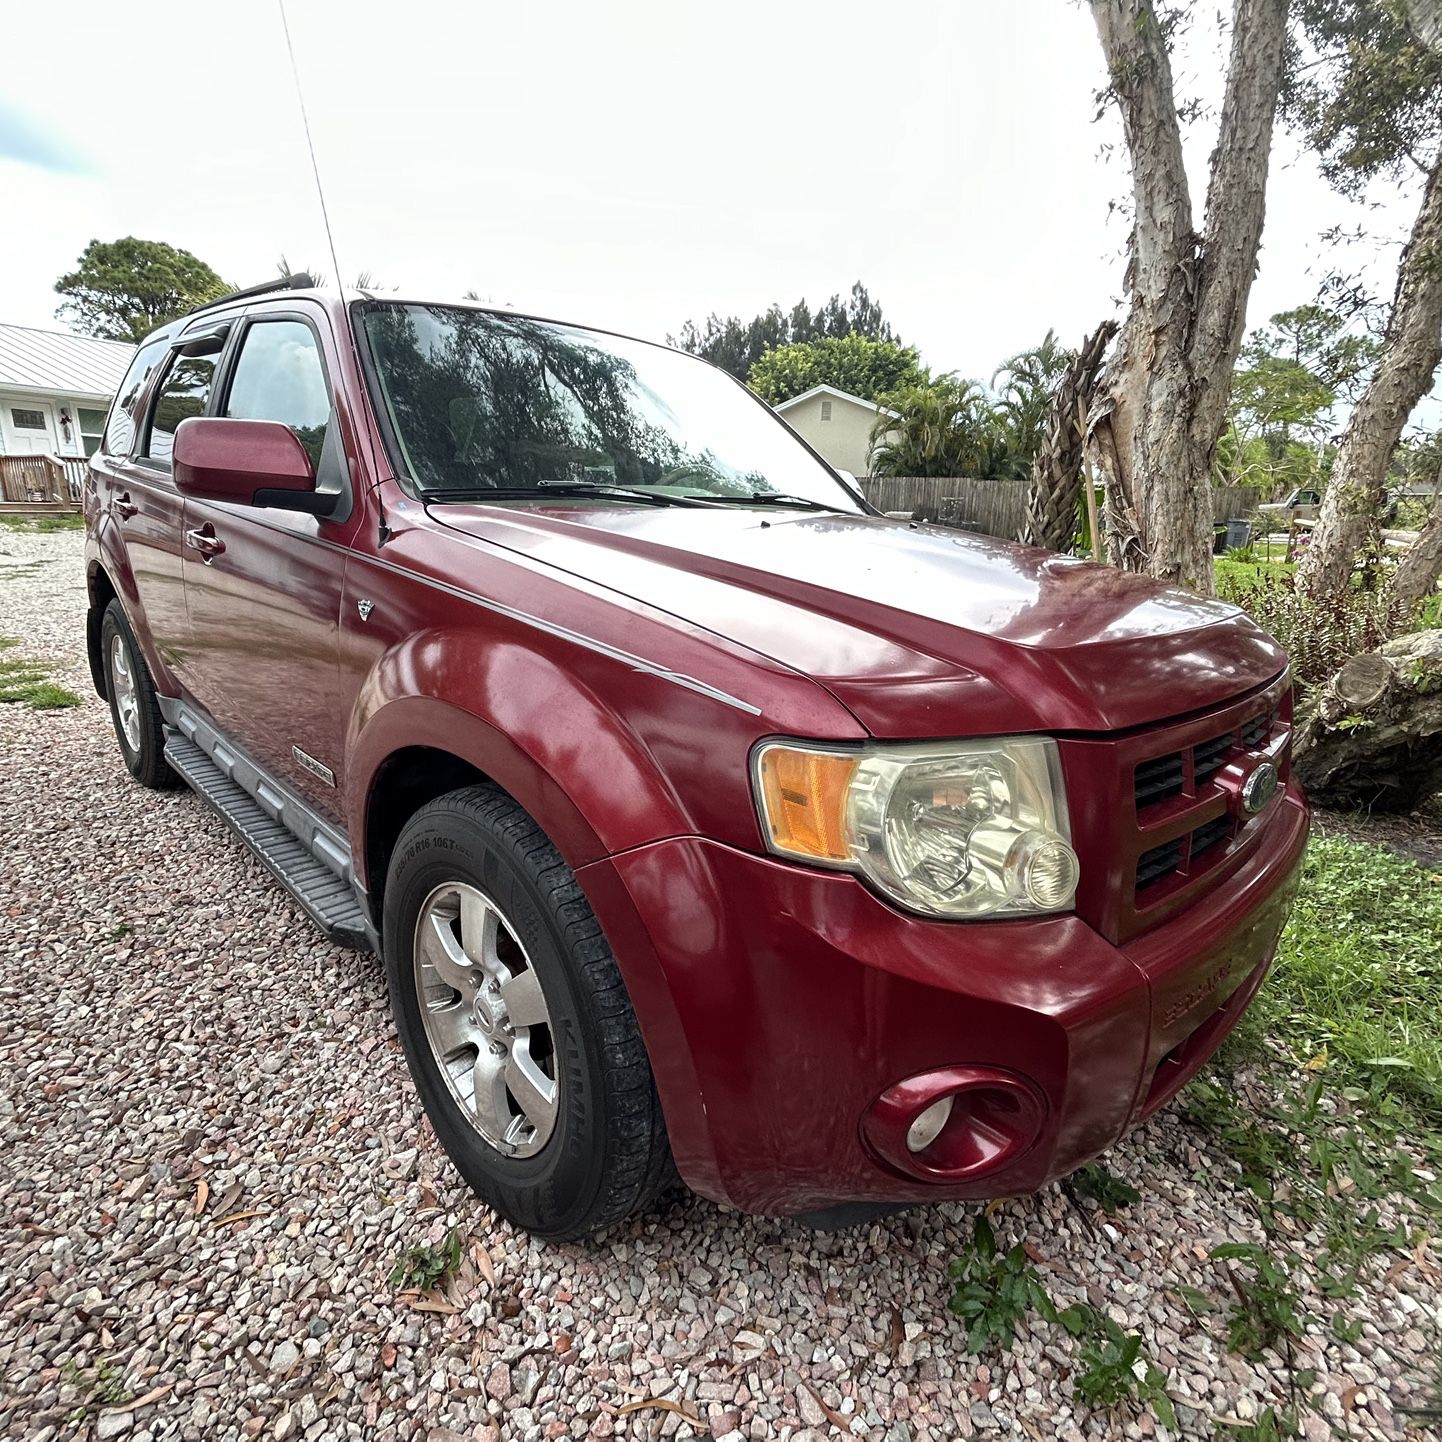 2008 Ford Escape 4WD V6 Limited